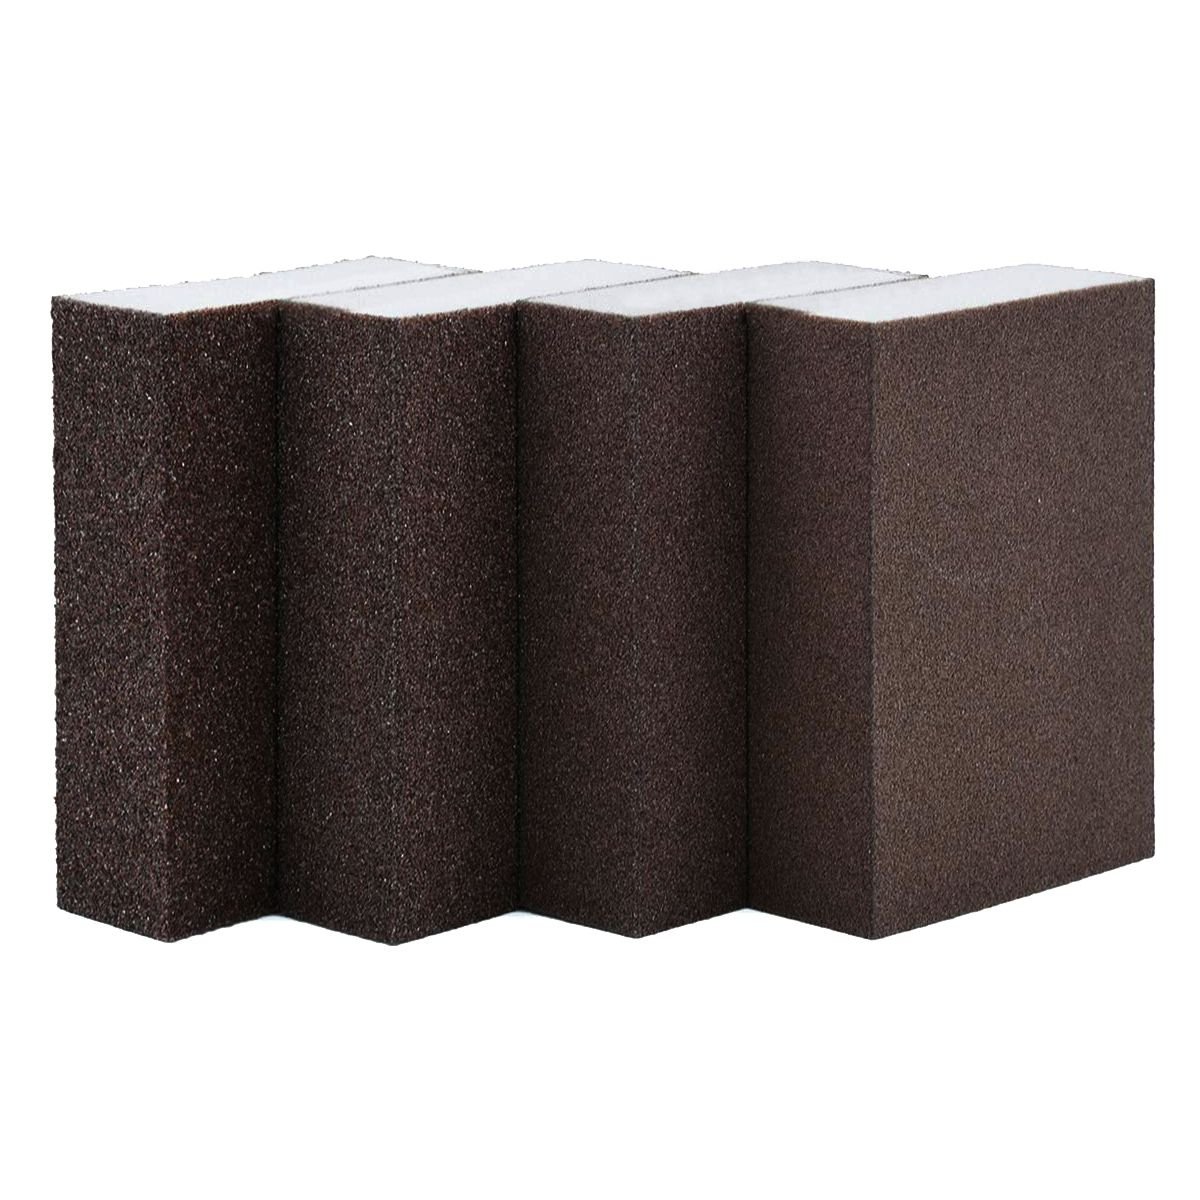 Paint and Drywall Furniture Onwon 8 Pieces Sanding Sponge Assorted Grits Coarse Medium Fine Superfine Sanding Blocks Washable and Reusable for Polishing Wood Metal 